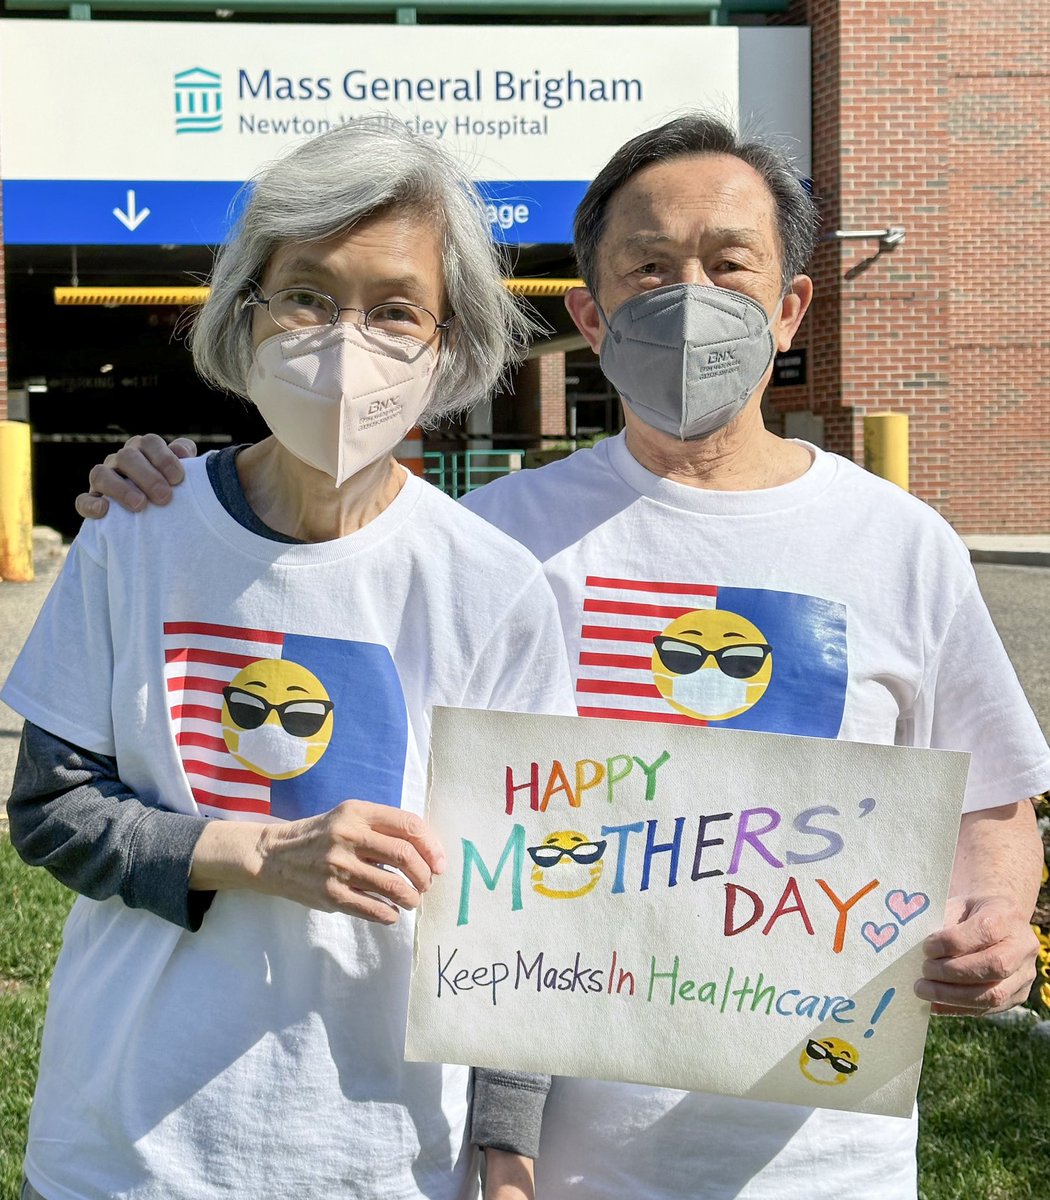 “We’re grateful to our docs & nurses. It’s smart to #KeepMasksinHealthcare 😷Who wants to get sick? We will wear our masks to keep you safe. We know you will do the same for us.”My Mom & Dad (both bivalent-boosted 2X) holding a sign to wish all #FrontlineHeroes #HappyMothersDay